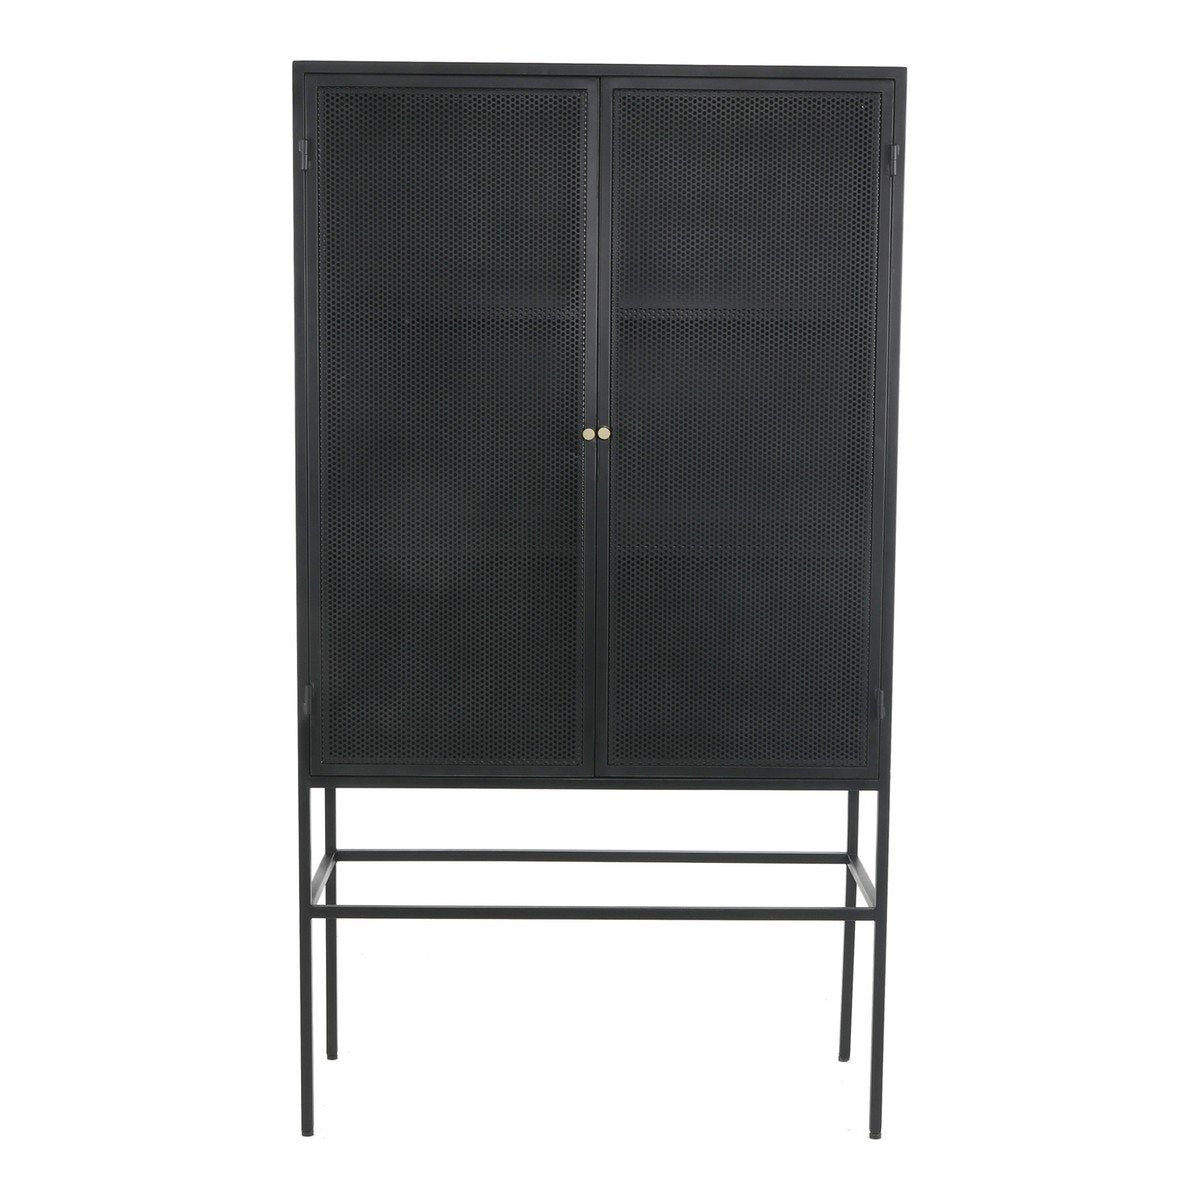 Moe's Home Collection Isandros Cabinet - GK-1117-02 - Moe's Home Collection - Cabinets - Minimal And Modern - 1